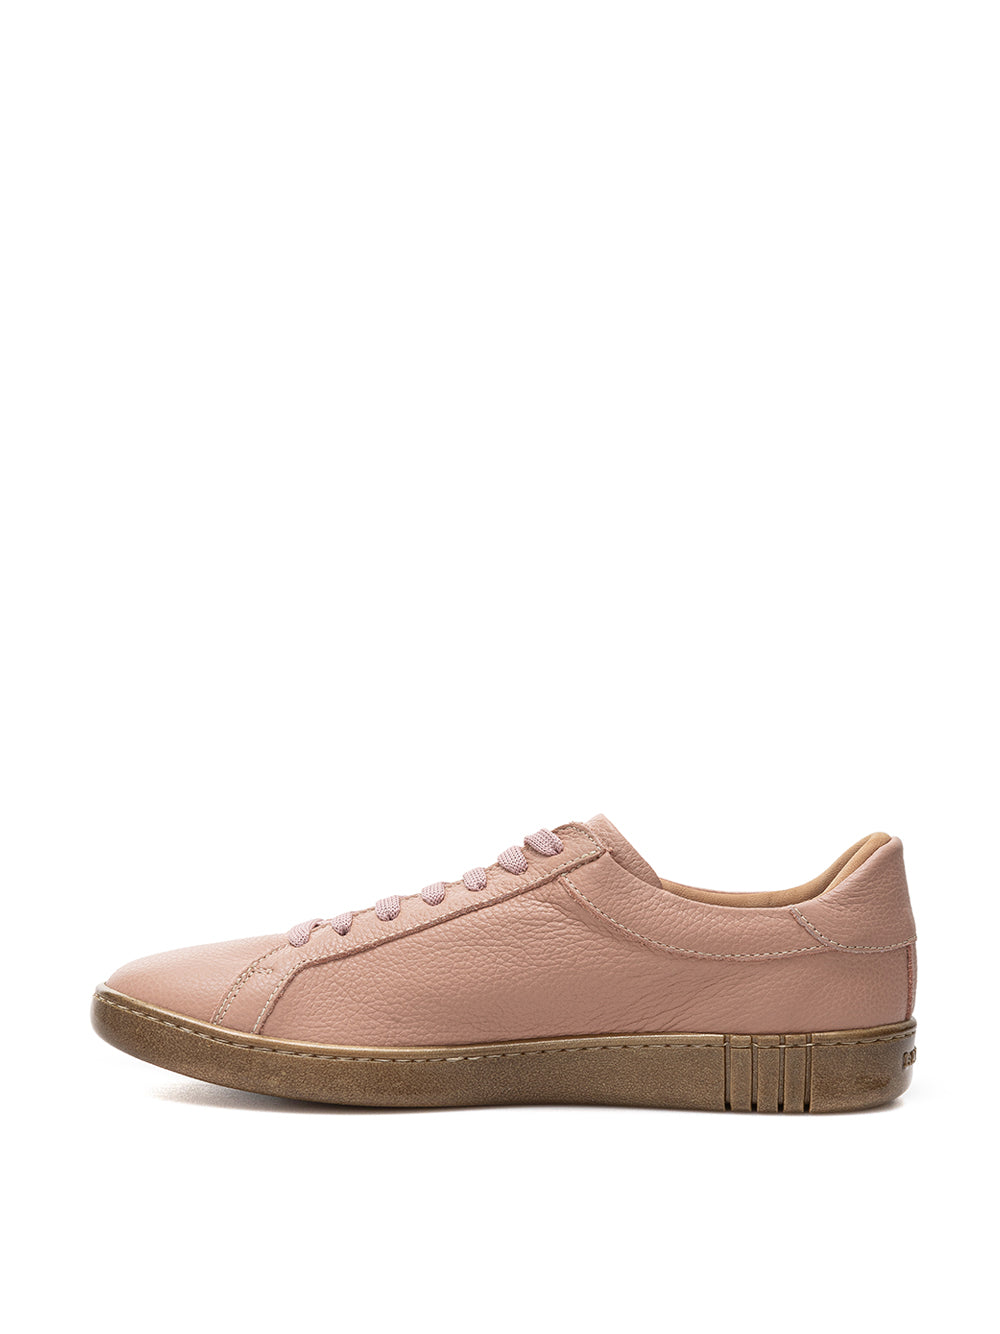 Bally Elegant Pink Leather Lace-up Sneakers